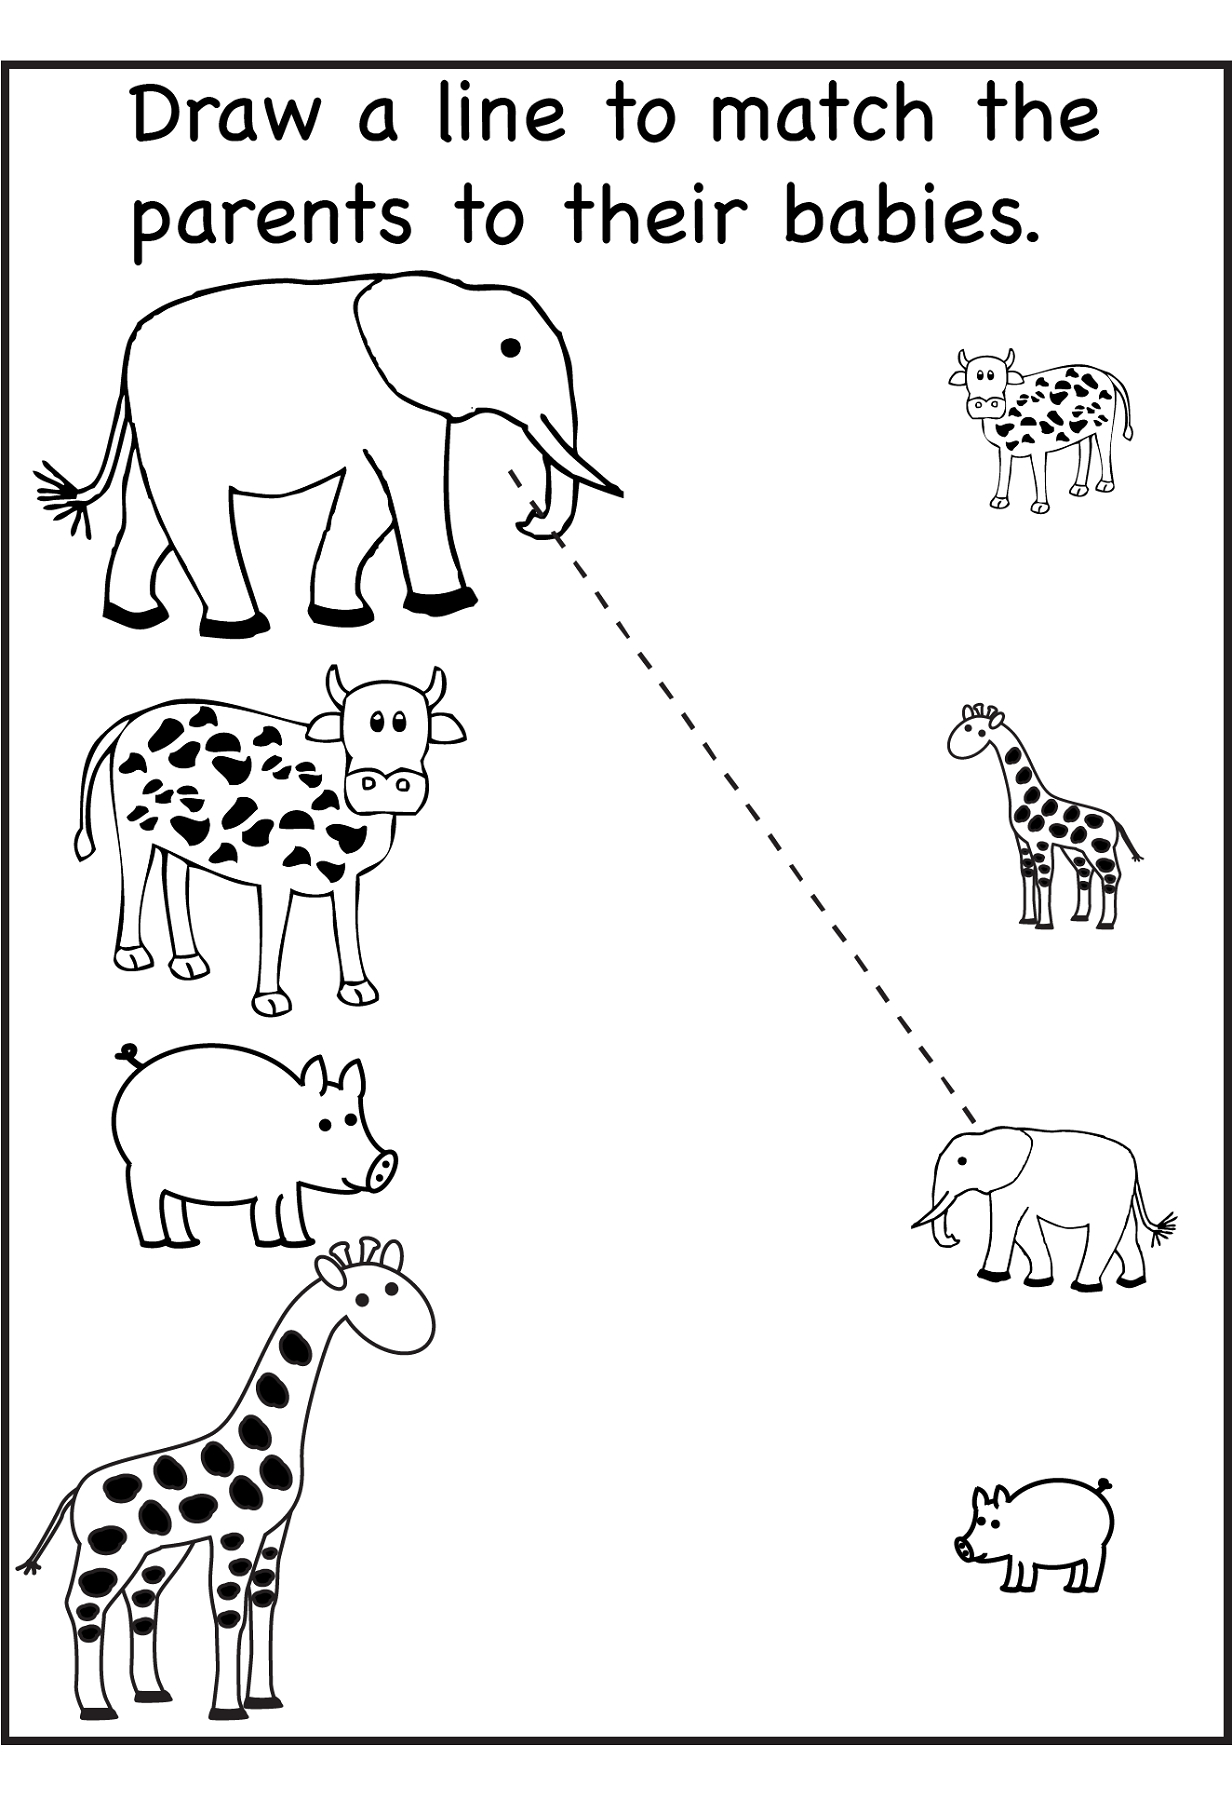 Printable Activity Sheets For Kids | Worksheets | Pinterest - Free Printable Activity Sheets For Kids